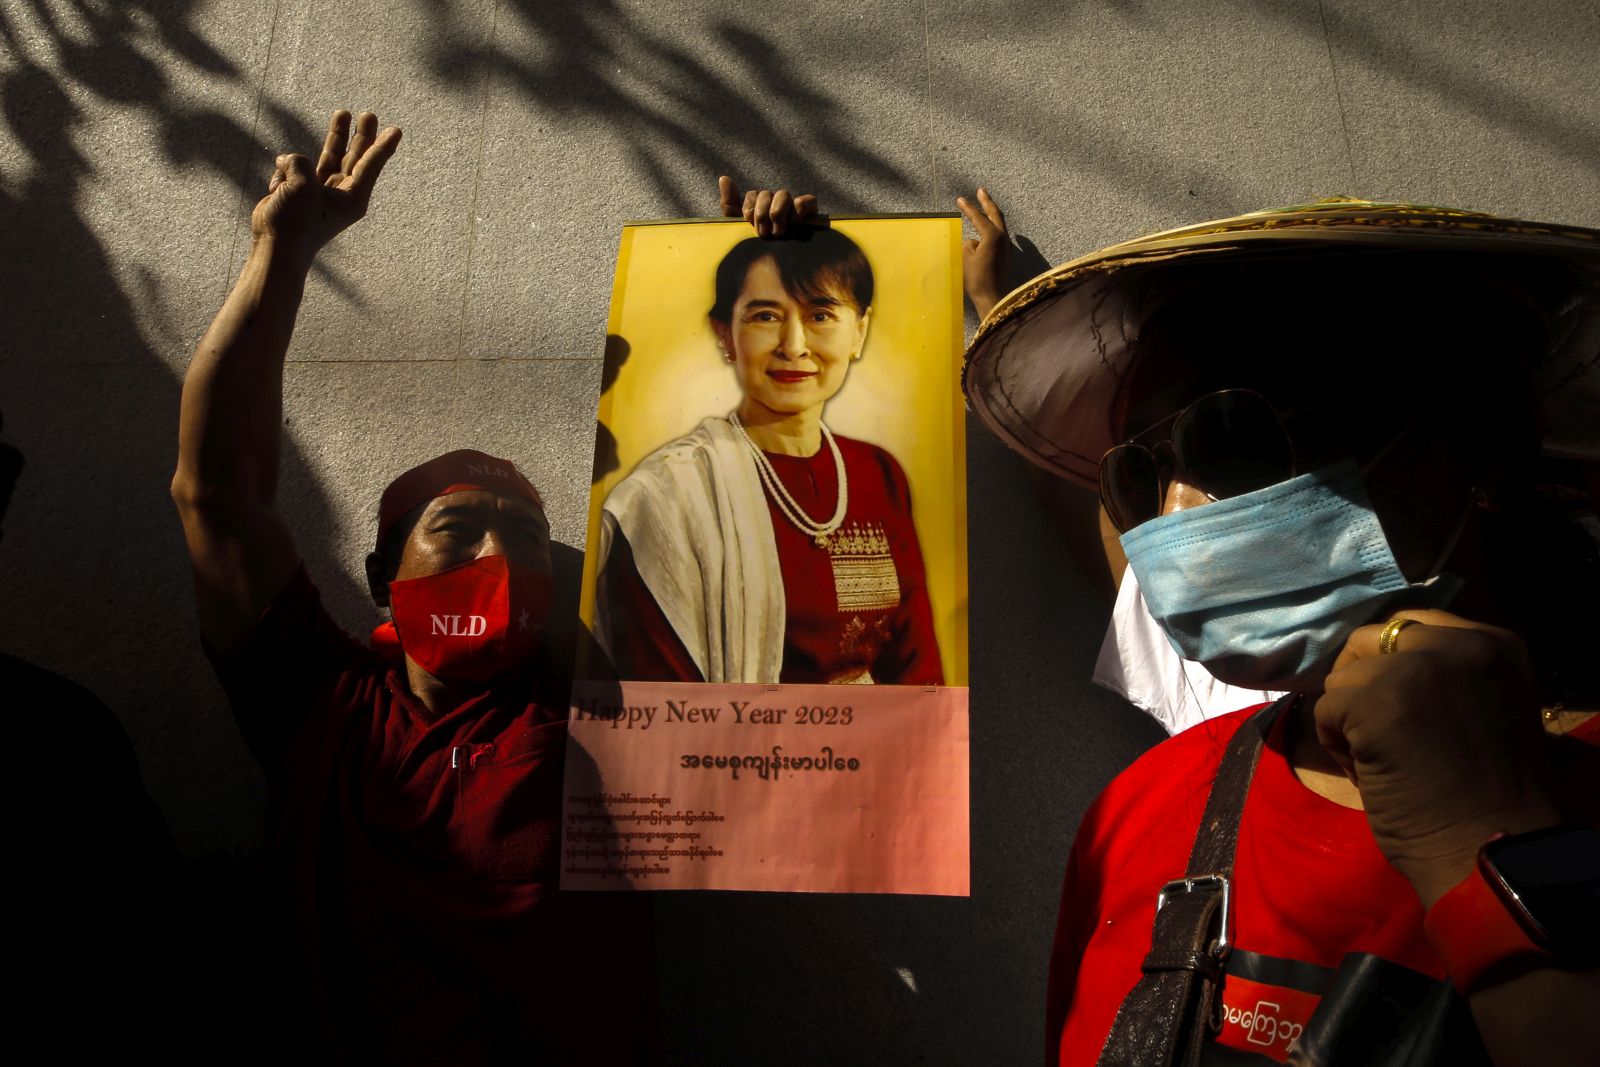 epa10373655 A Myanmar migrant worker living in Thailand holds a picture of Myanmar democracy icon Aung San Suu Kyi at a rally outside the Myanmar embassy in Bangkok, Thailand, 19 December 2022. Myanmar migrant workers rallied outside the Myanmar embassy to mark the International Migrants Day which was observed the previous day on 18 December, to protest against Myanmar's State Administration Council and in support of Aung San Suu Kyi, the 1991 Nobel Peace Prize laureate and former State Counsellor of Myanmar and Minister of Foreign Affairs.  EPA/DIEGO AZUBEL